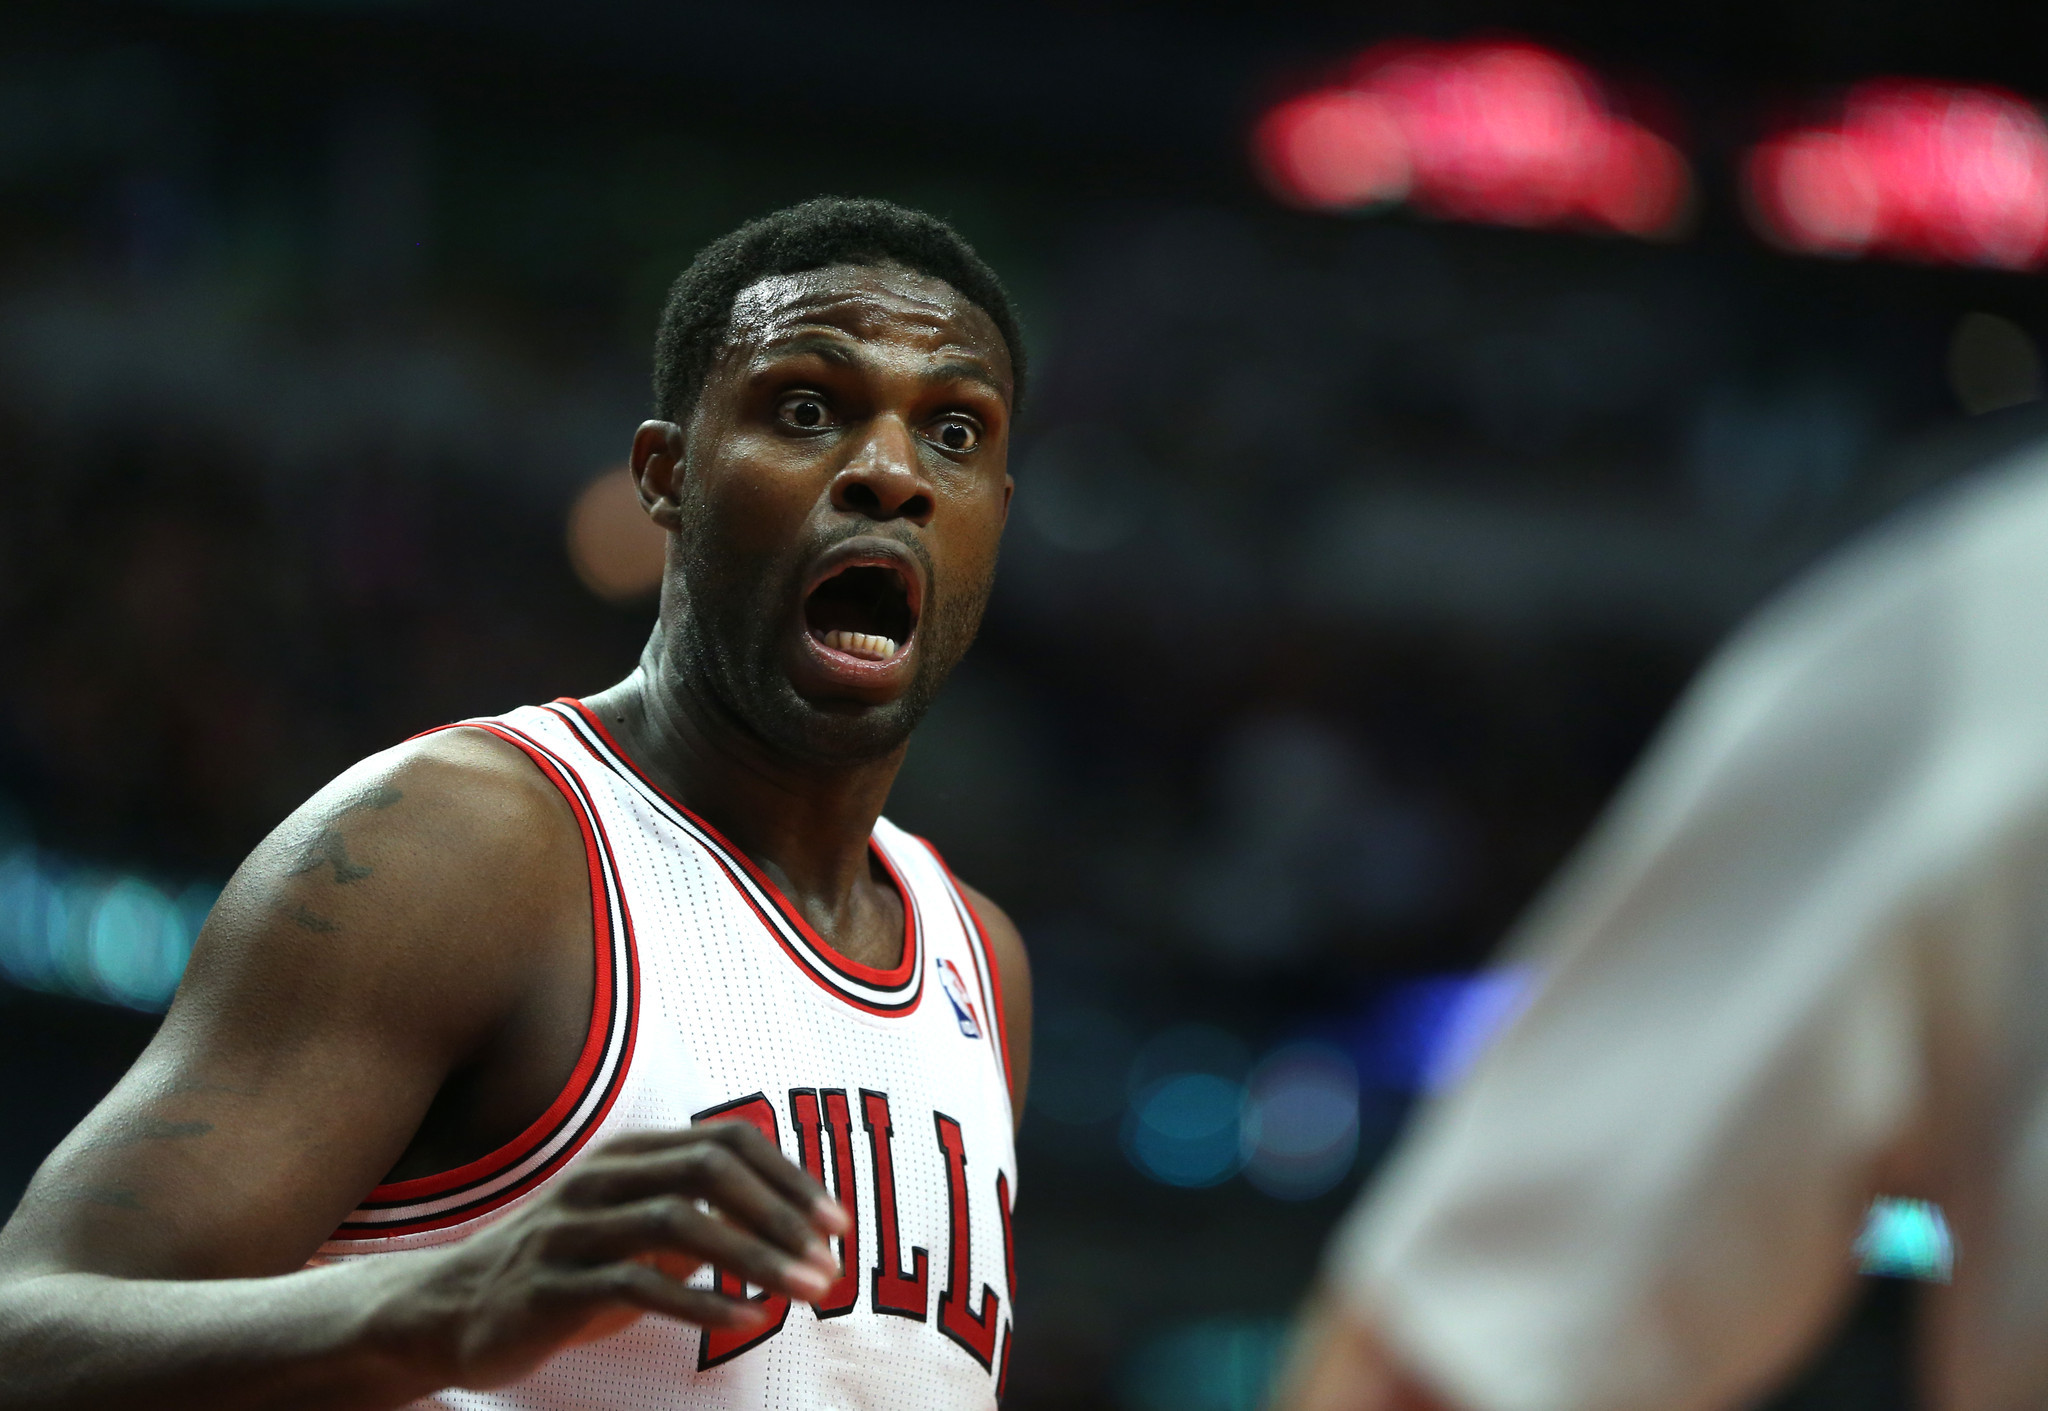 Nazr Mohammed re-signs with Bulls - Chicago Tribune2048 x 1411